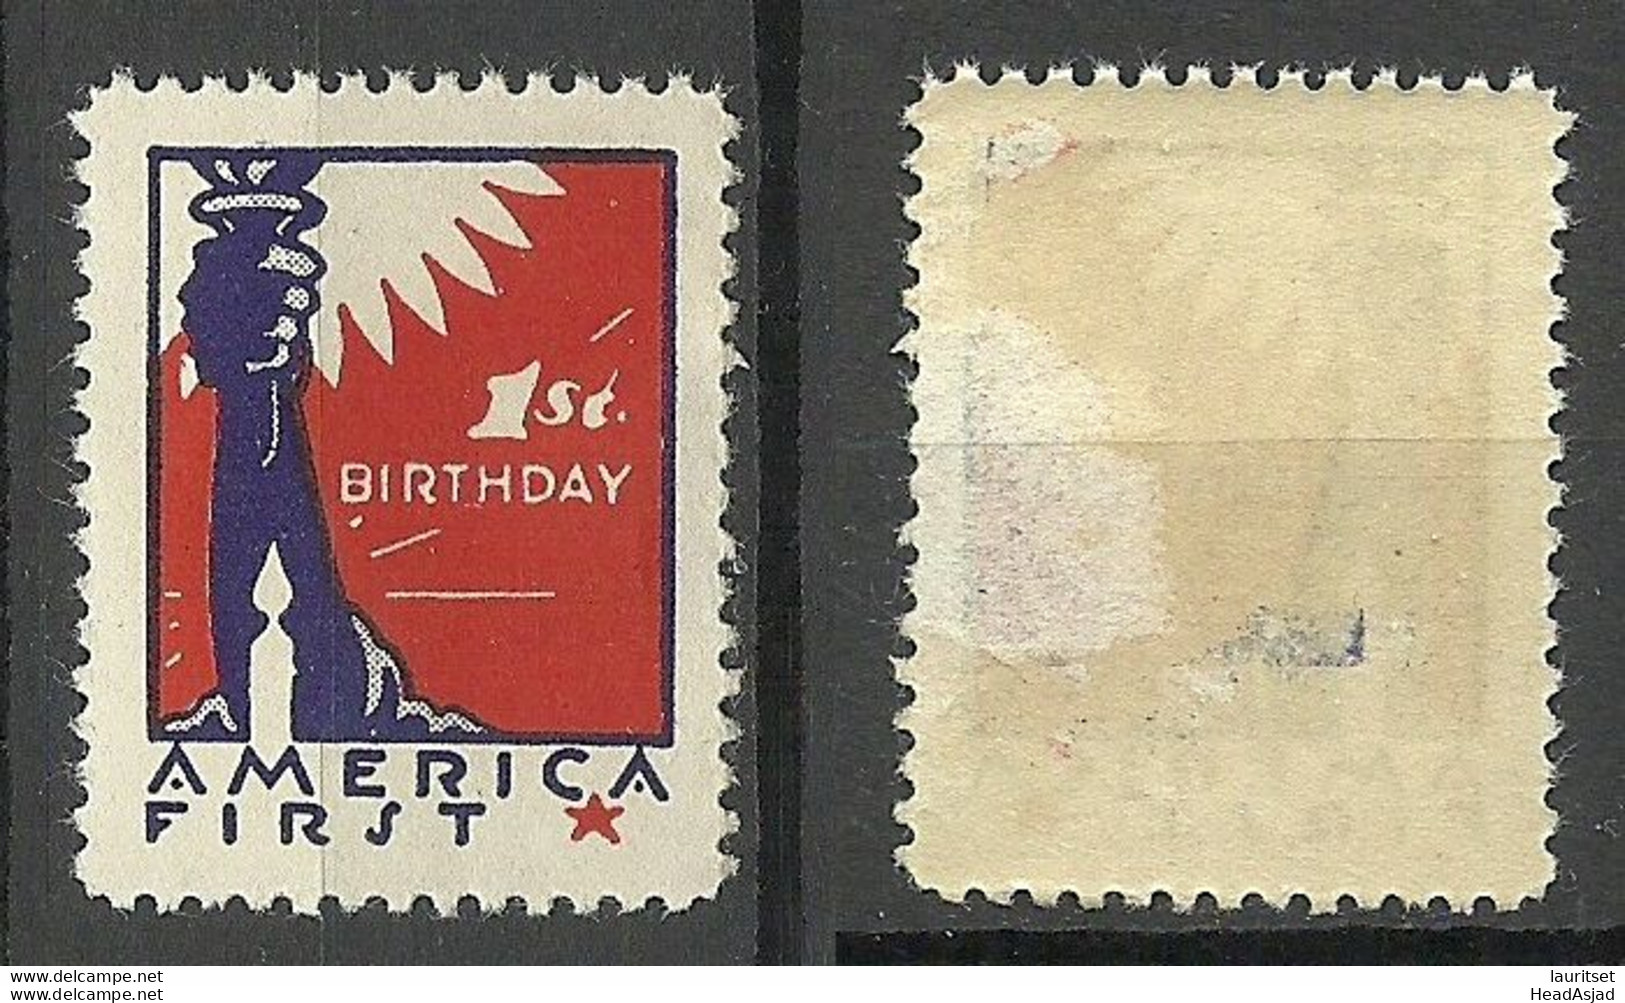 USA Patriotic Vignette America First Poster Stamp NB! Defect - Thinned Place! - Erinnofilie